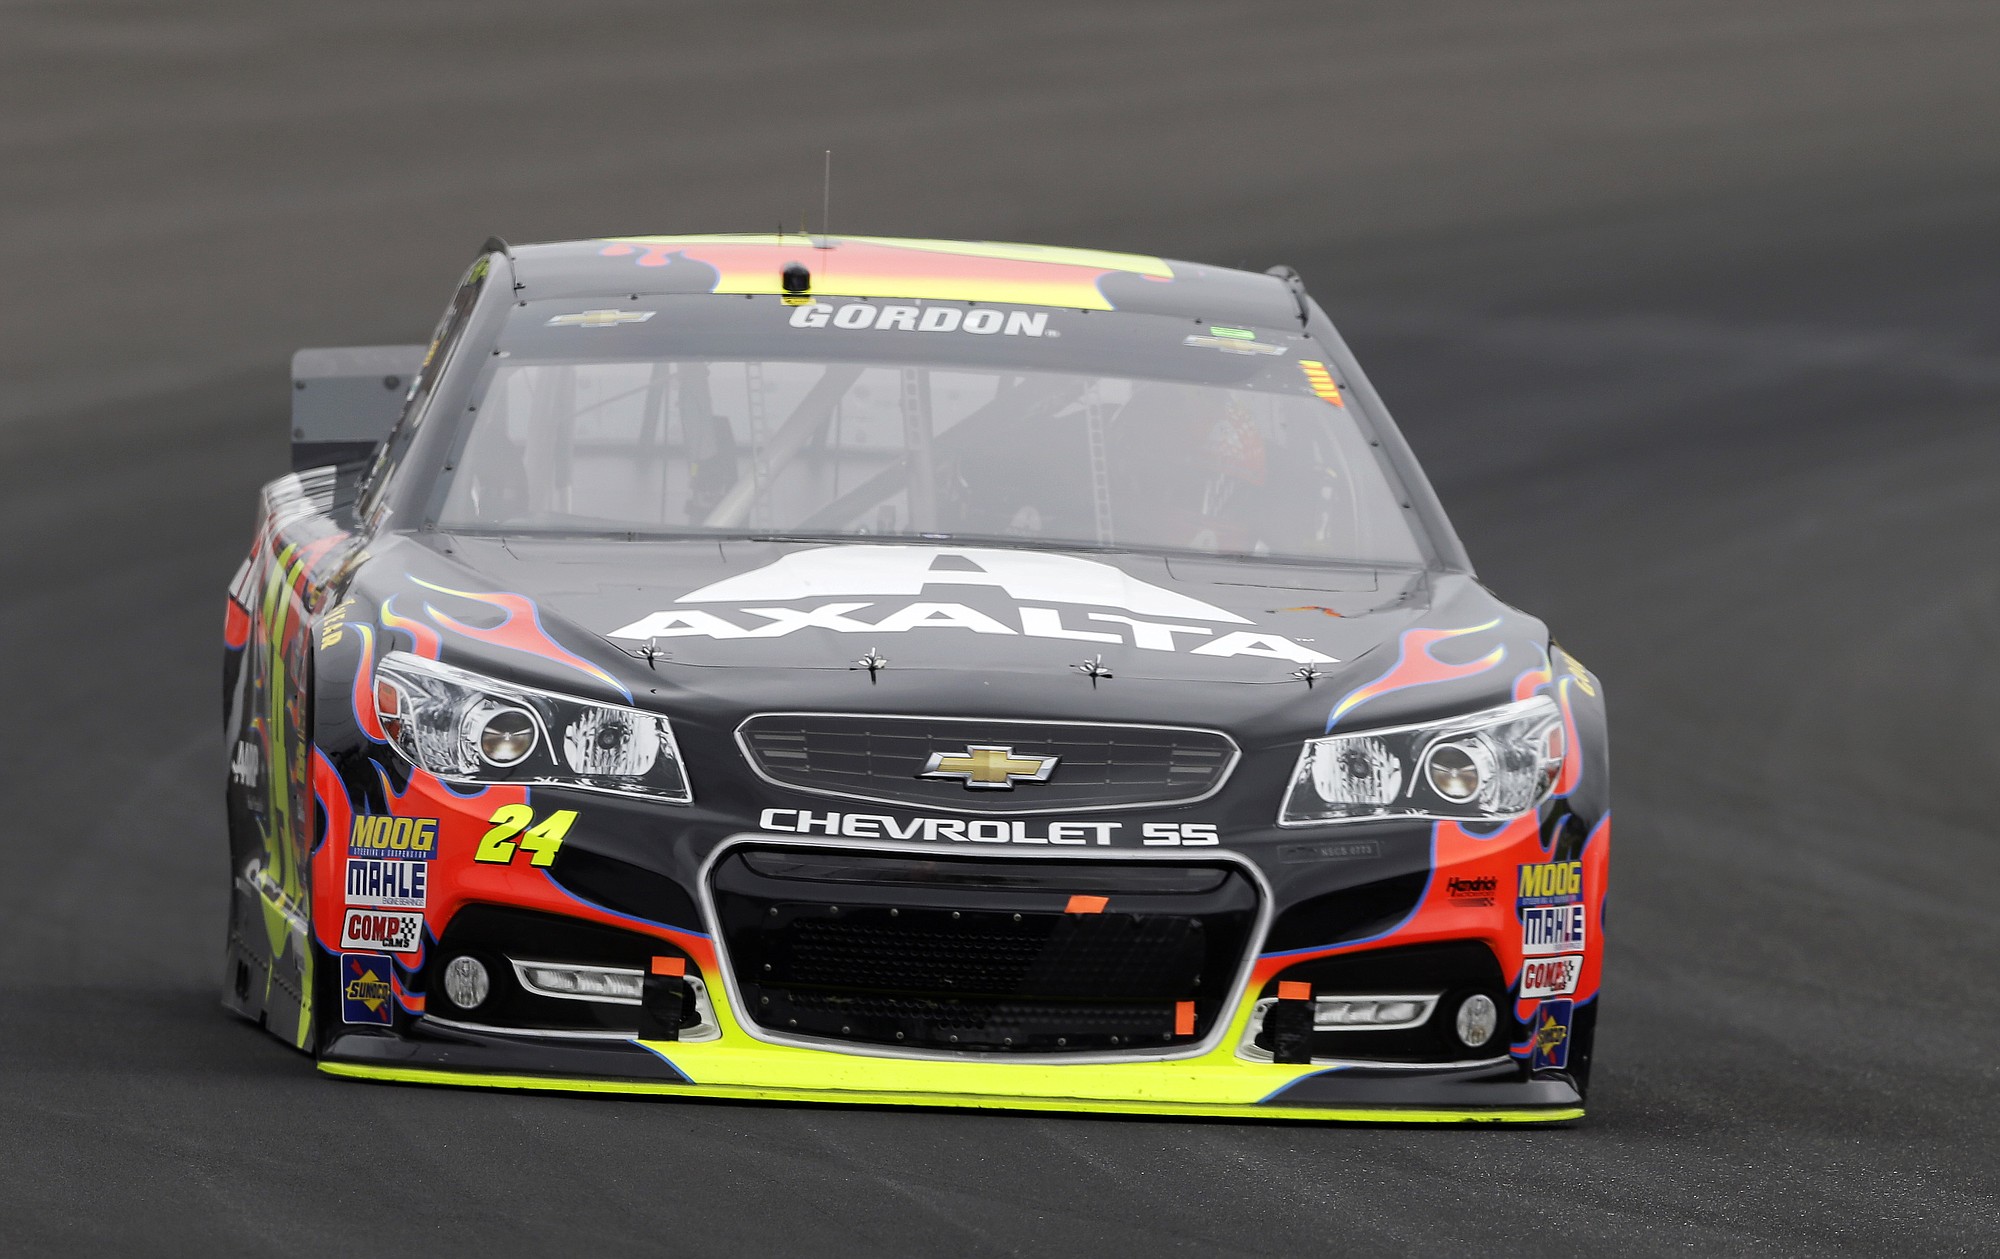 Jeff Gordon drives through Turn 1 during the Brickyard 400 auto race at Indianapolis Motor Speedway in Indianapolis, Sunday, July 27, 2014.